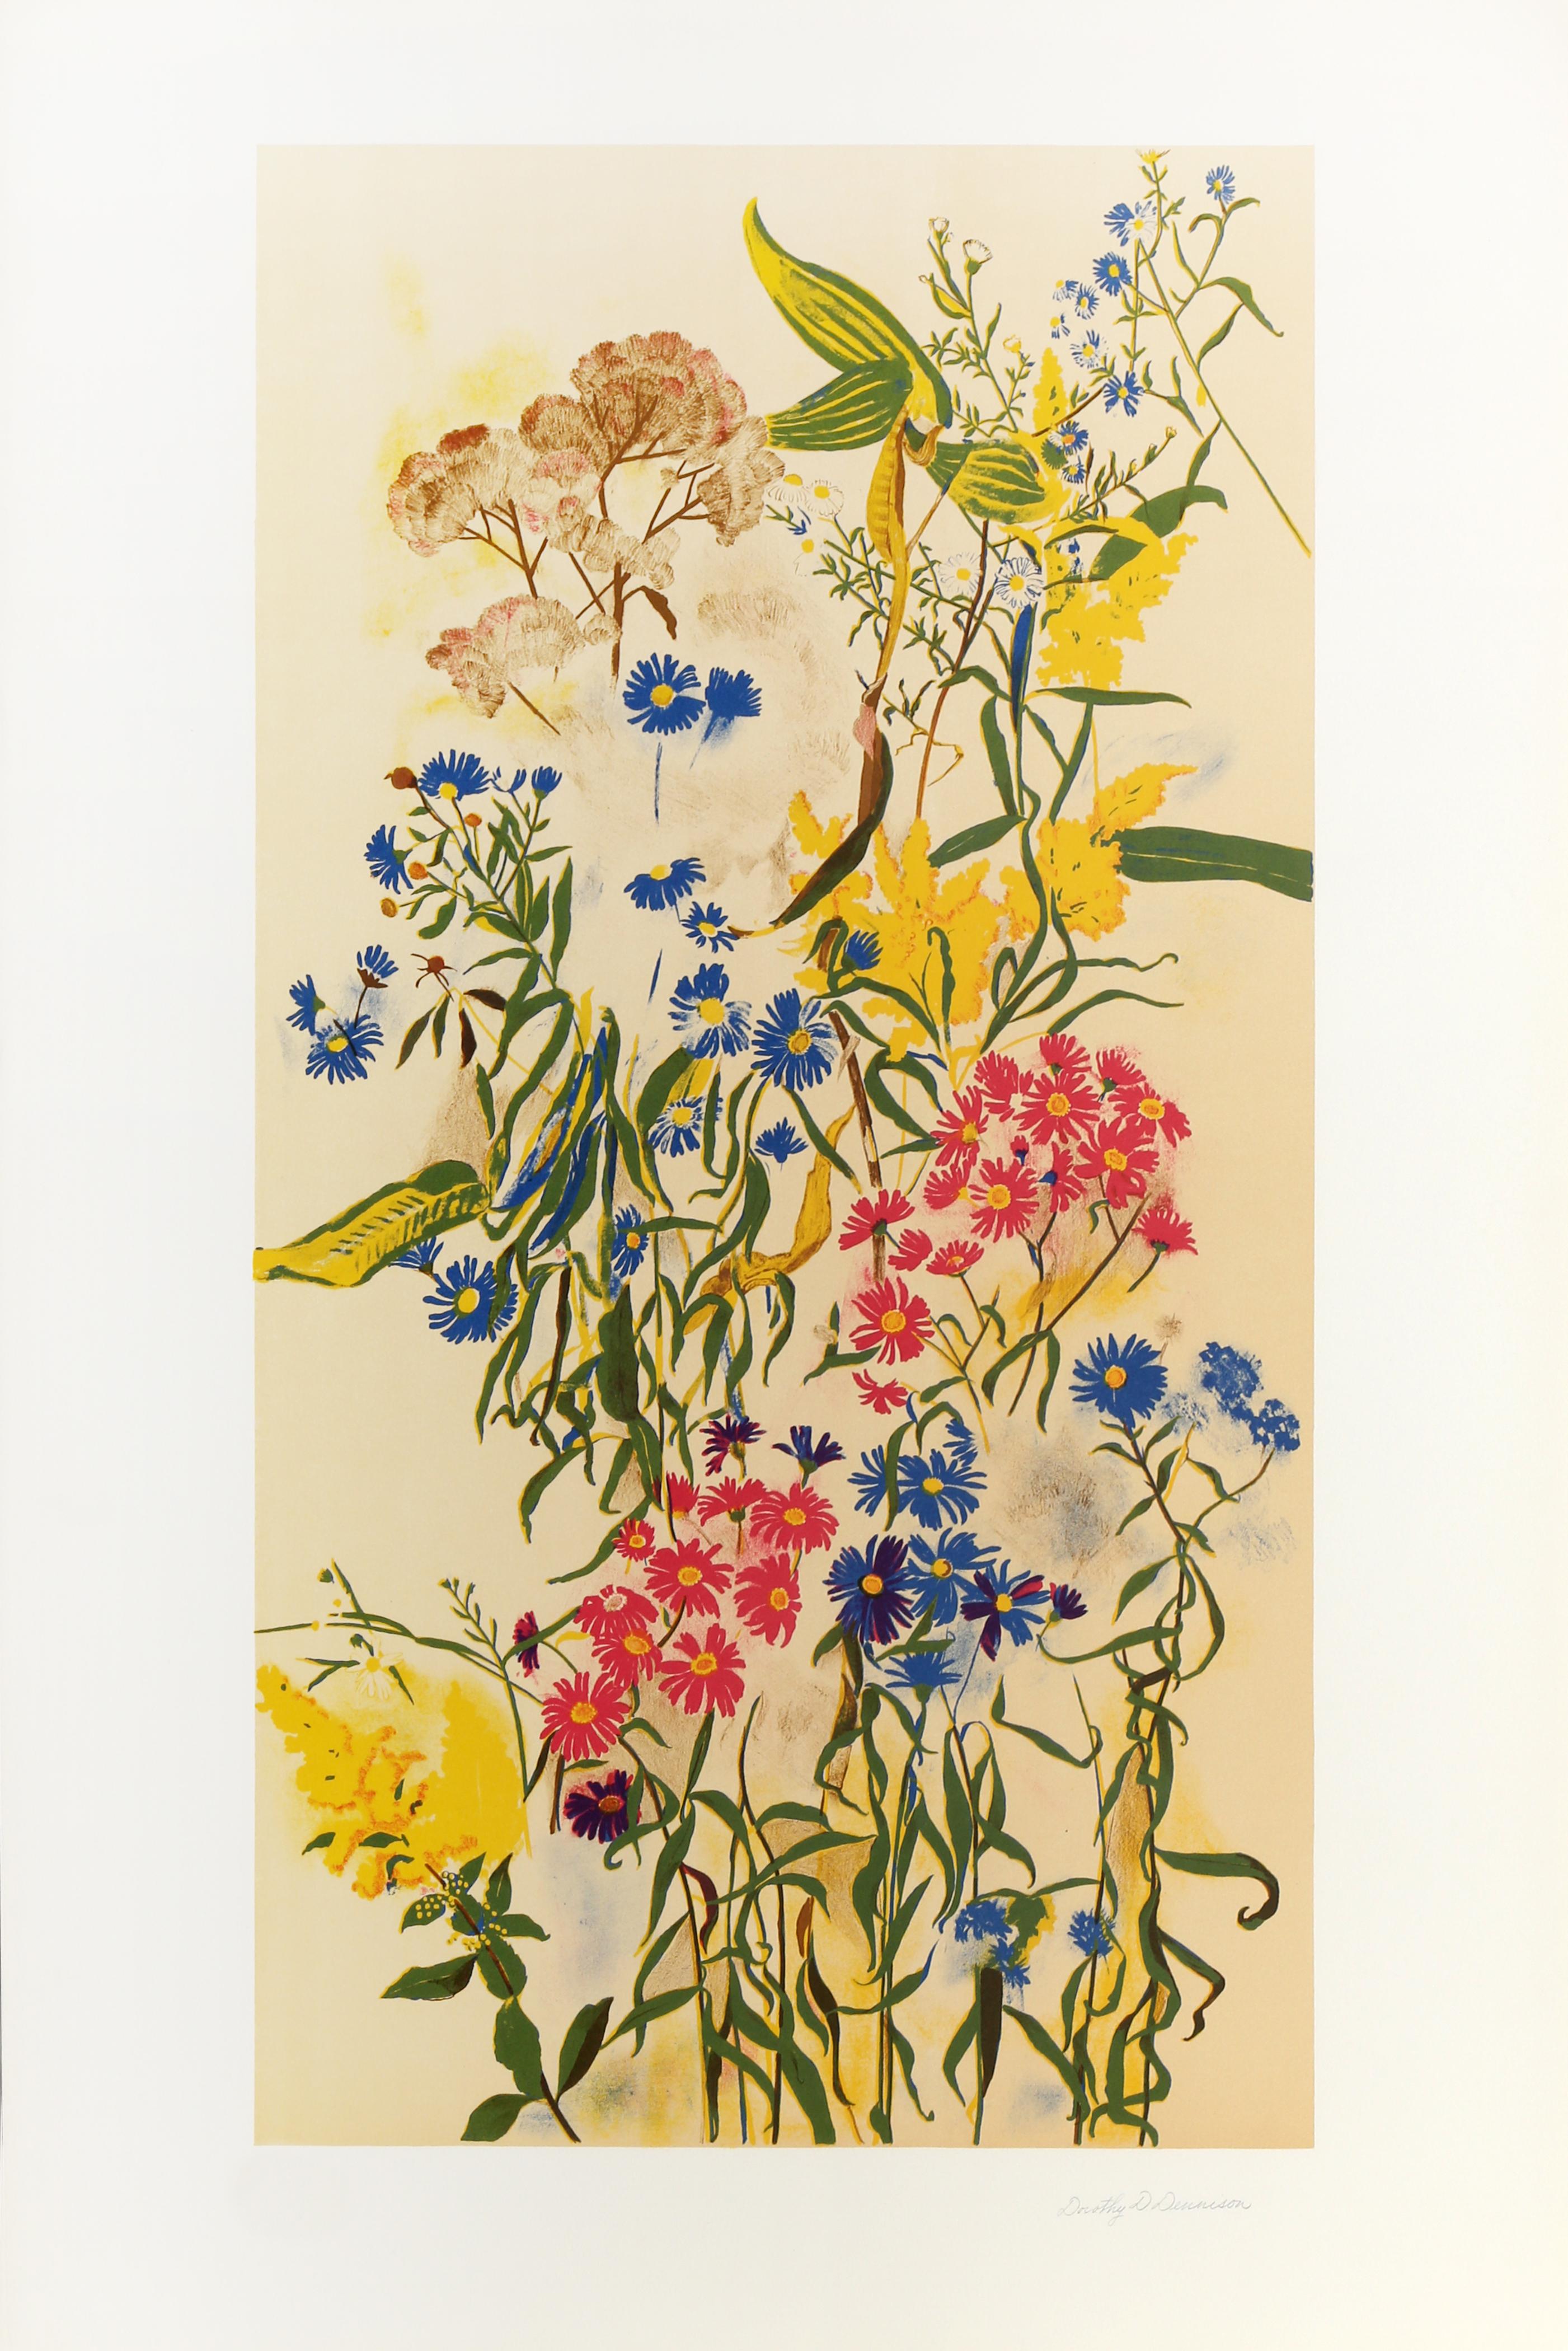 Wild Asters by Dorothy Dell Dennison, American (1908–1994)
Date: 1970
Lithograph, signed and numbered in pencil
Edition of 100
Size: 36 in. x 24 in. (91.44 cm x 60.96 cm)